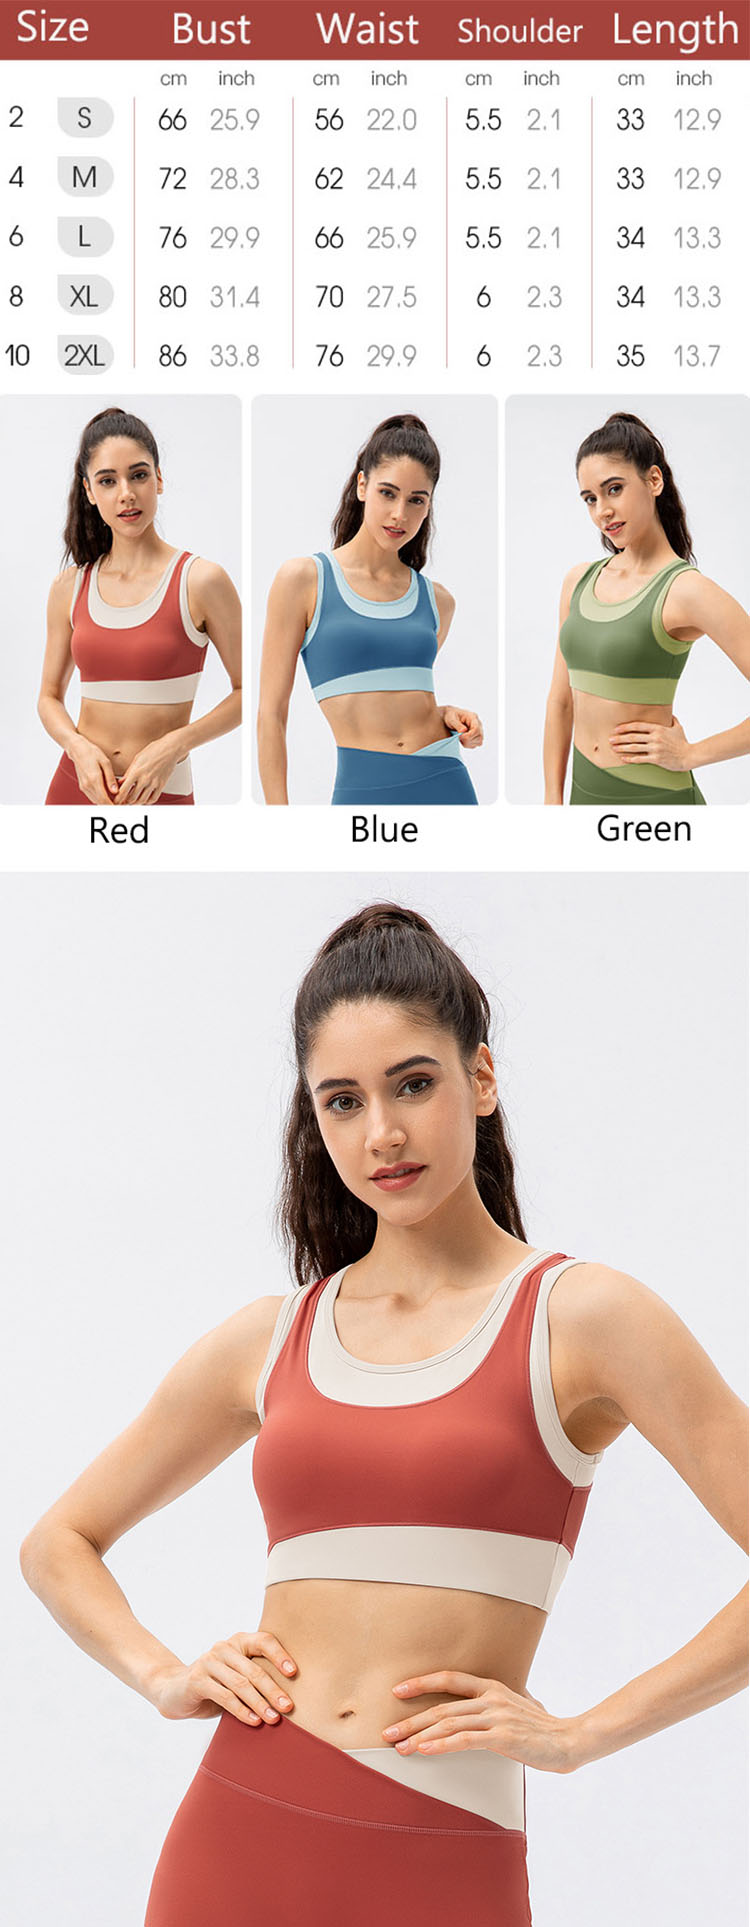 Everyday sports bra with balance between stable support and good comfort is the key design factor